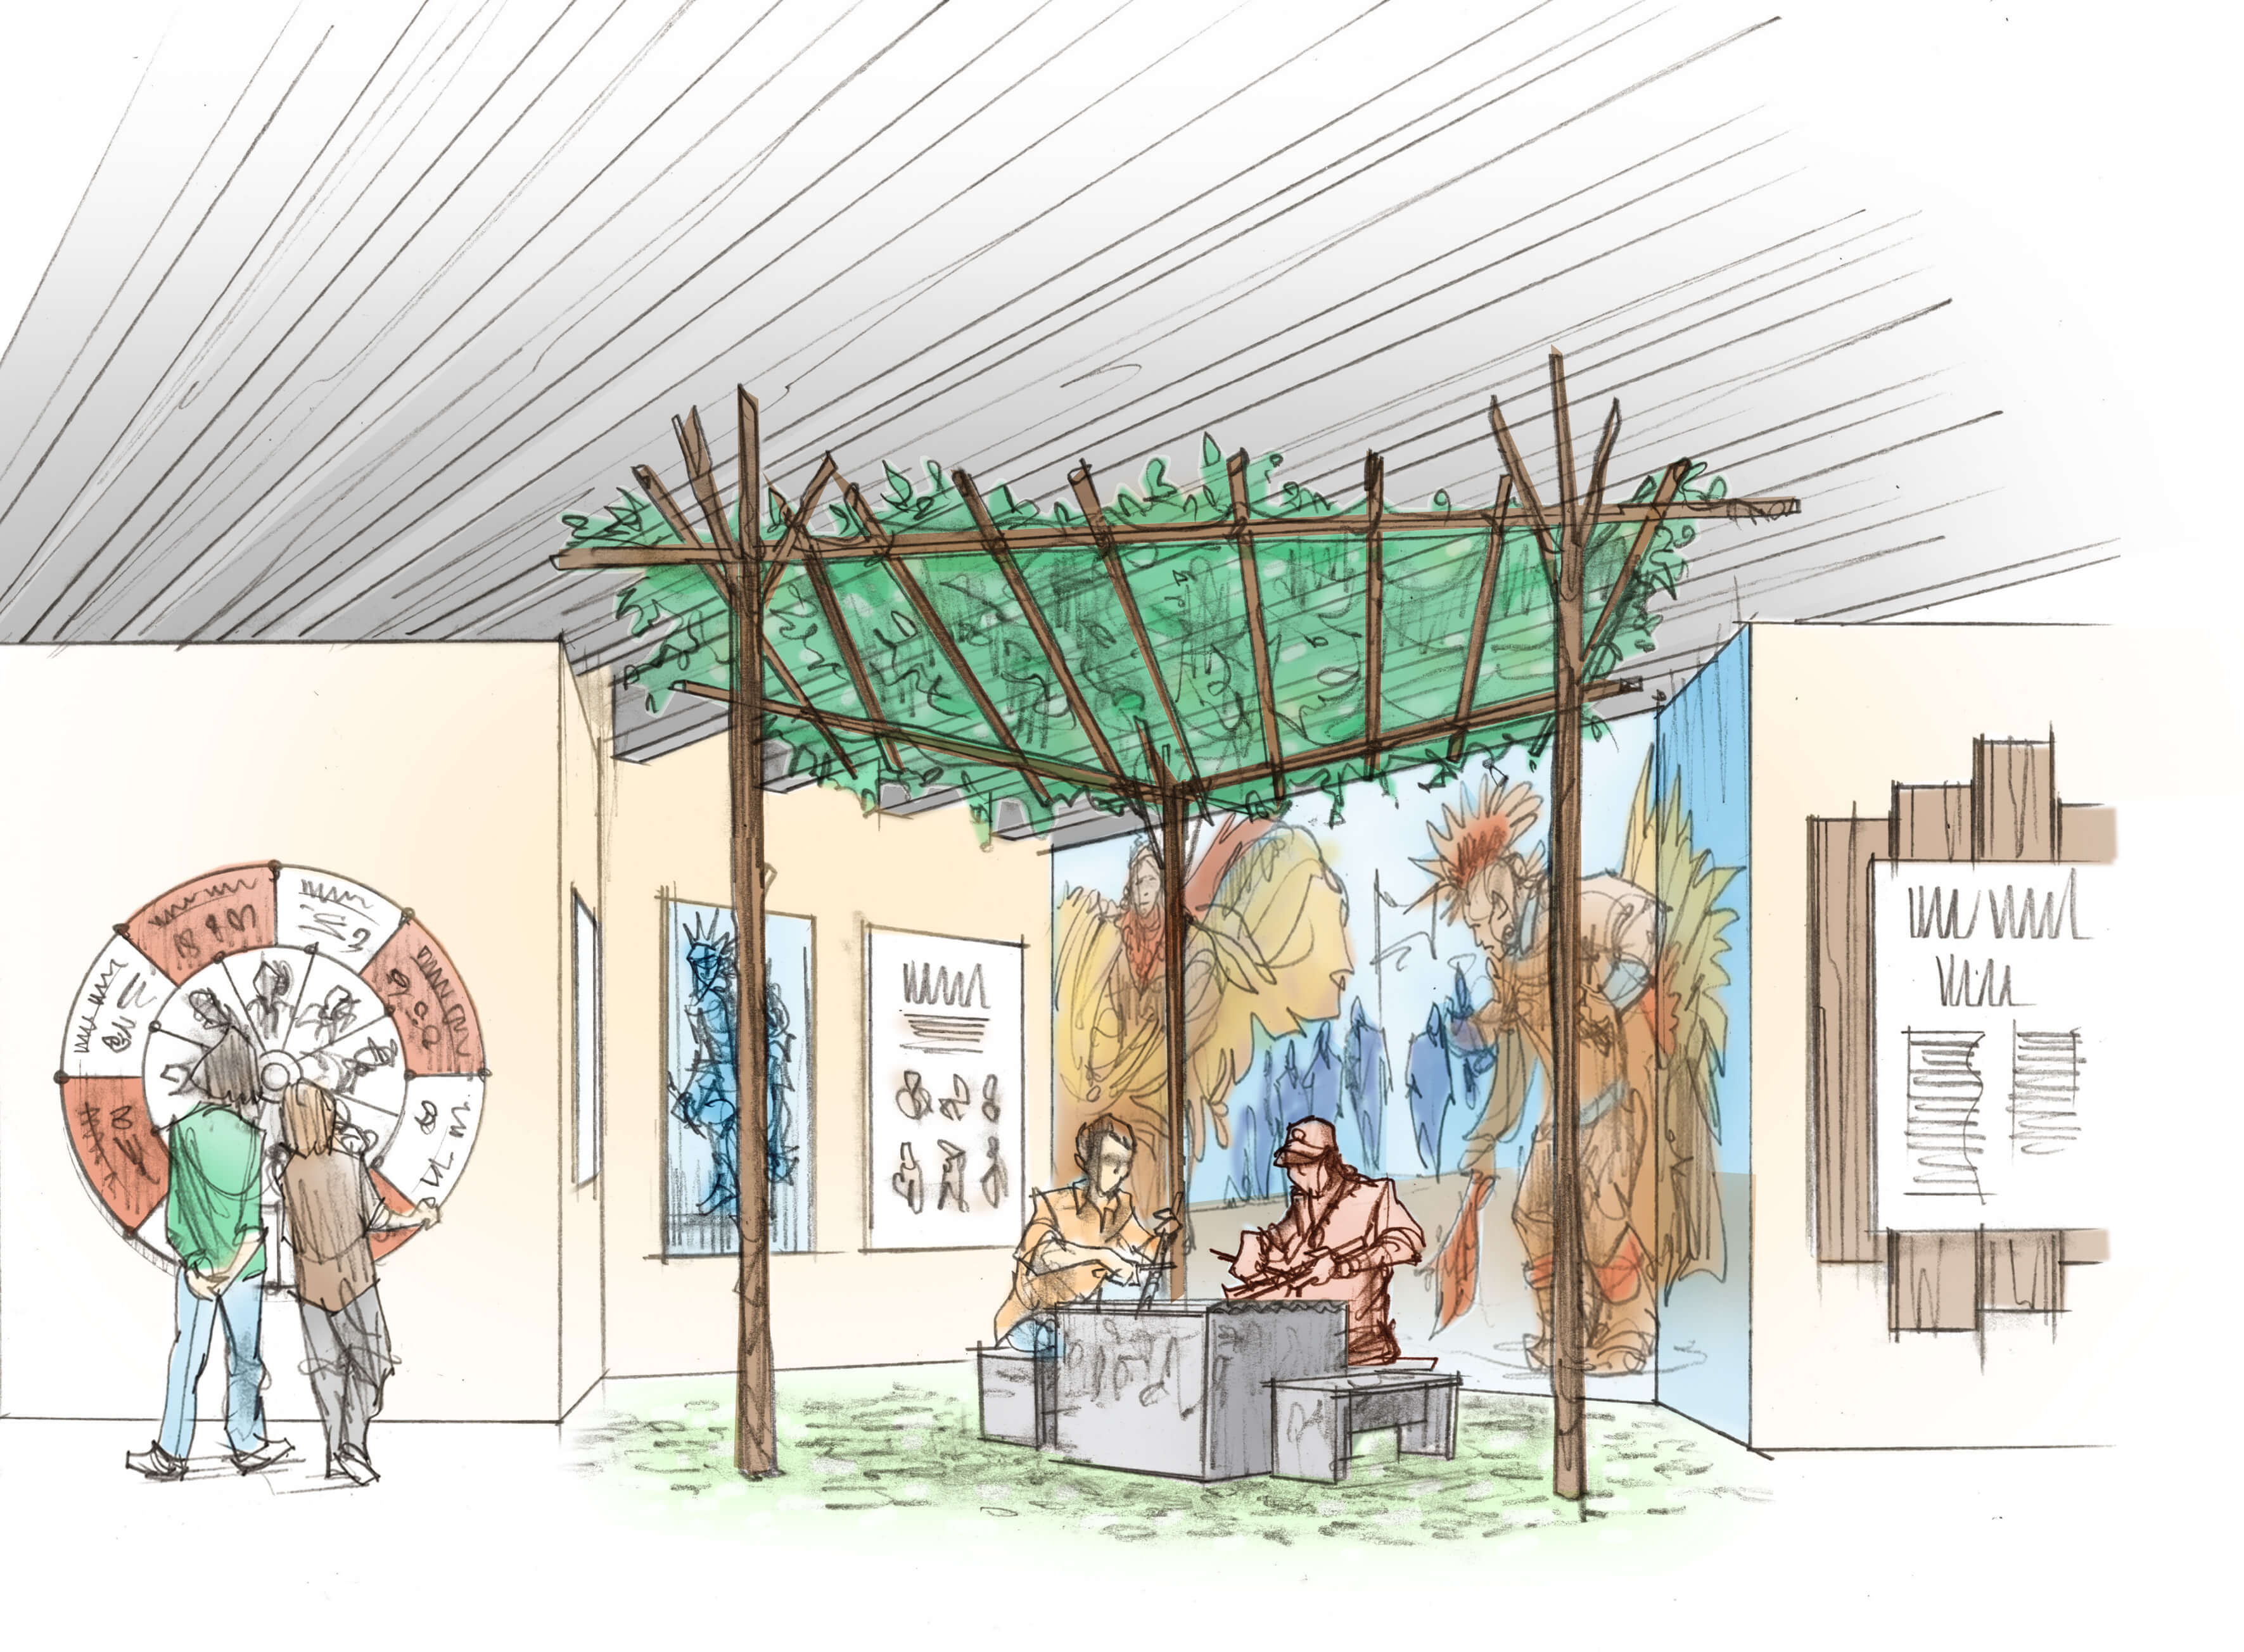 Sketch of visitors interacting with exhibits